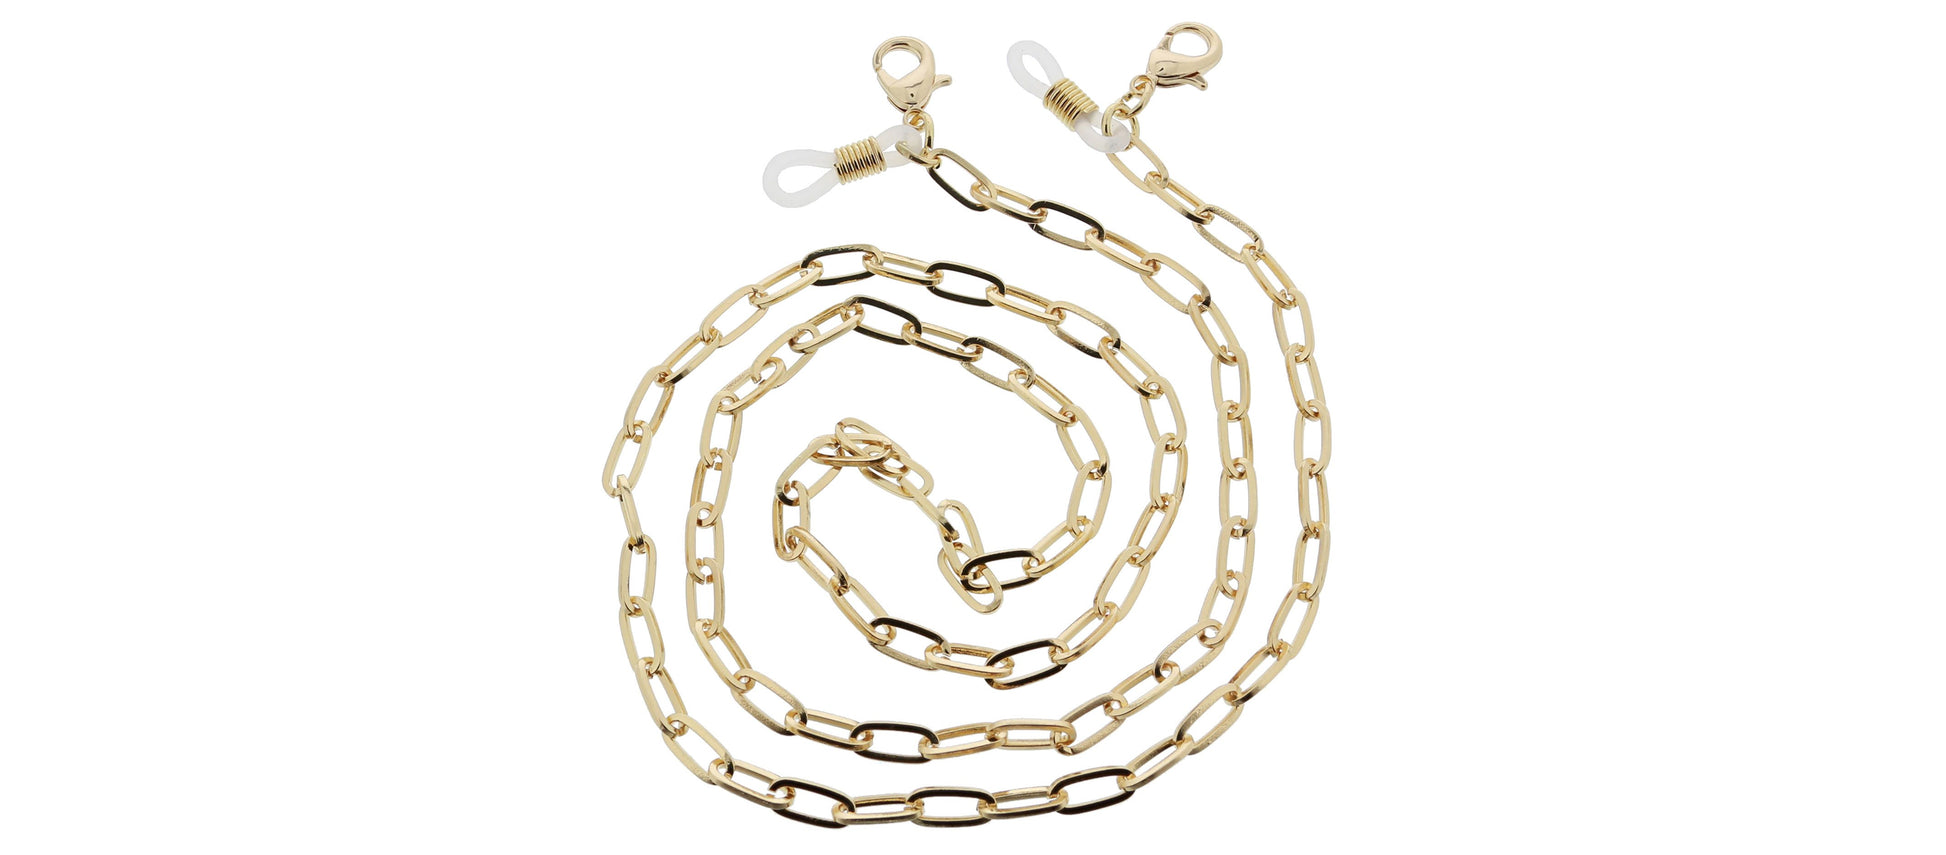 gold links glasses chain swirled on a white background